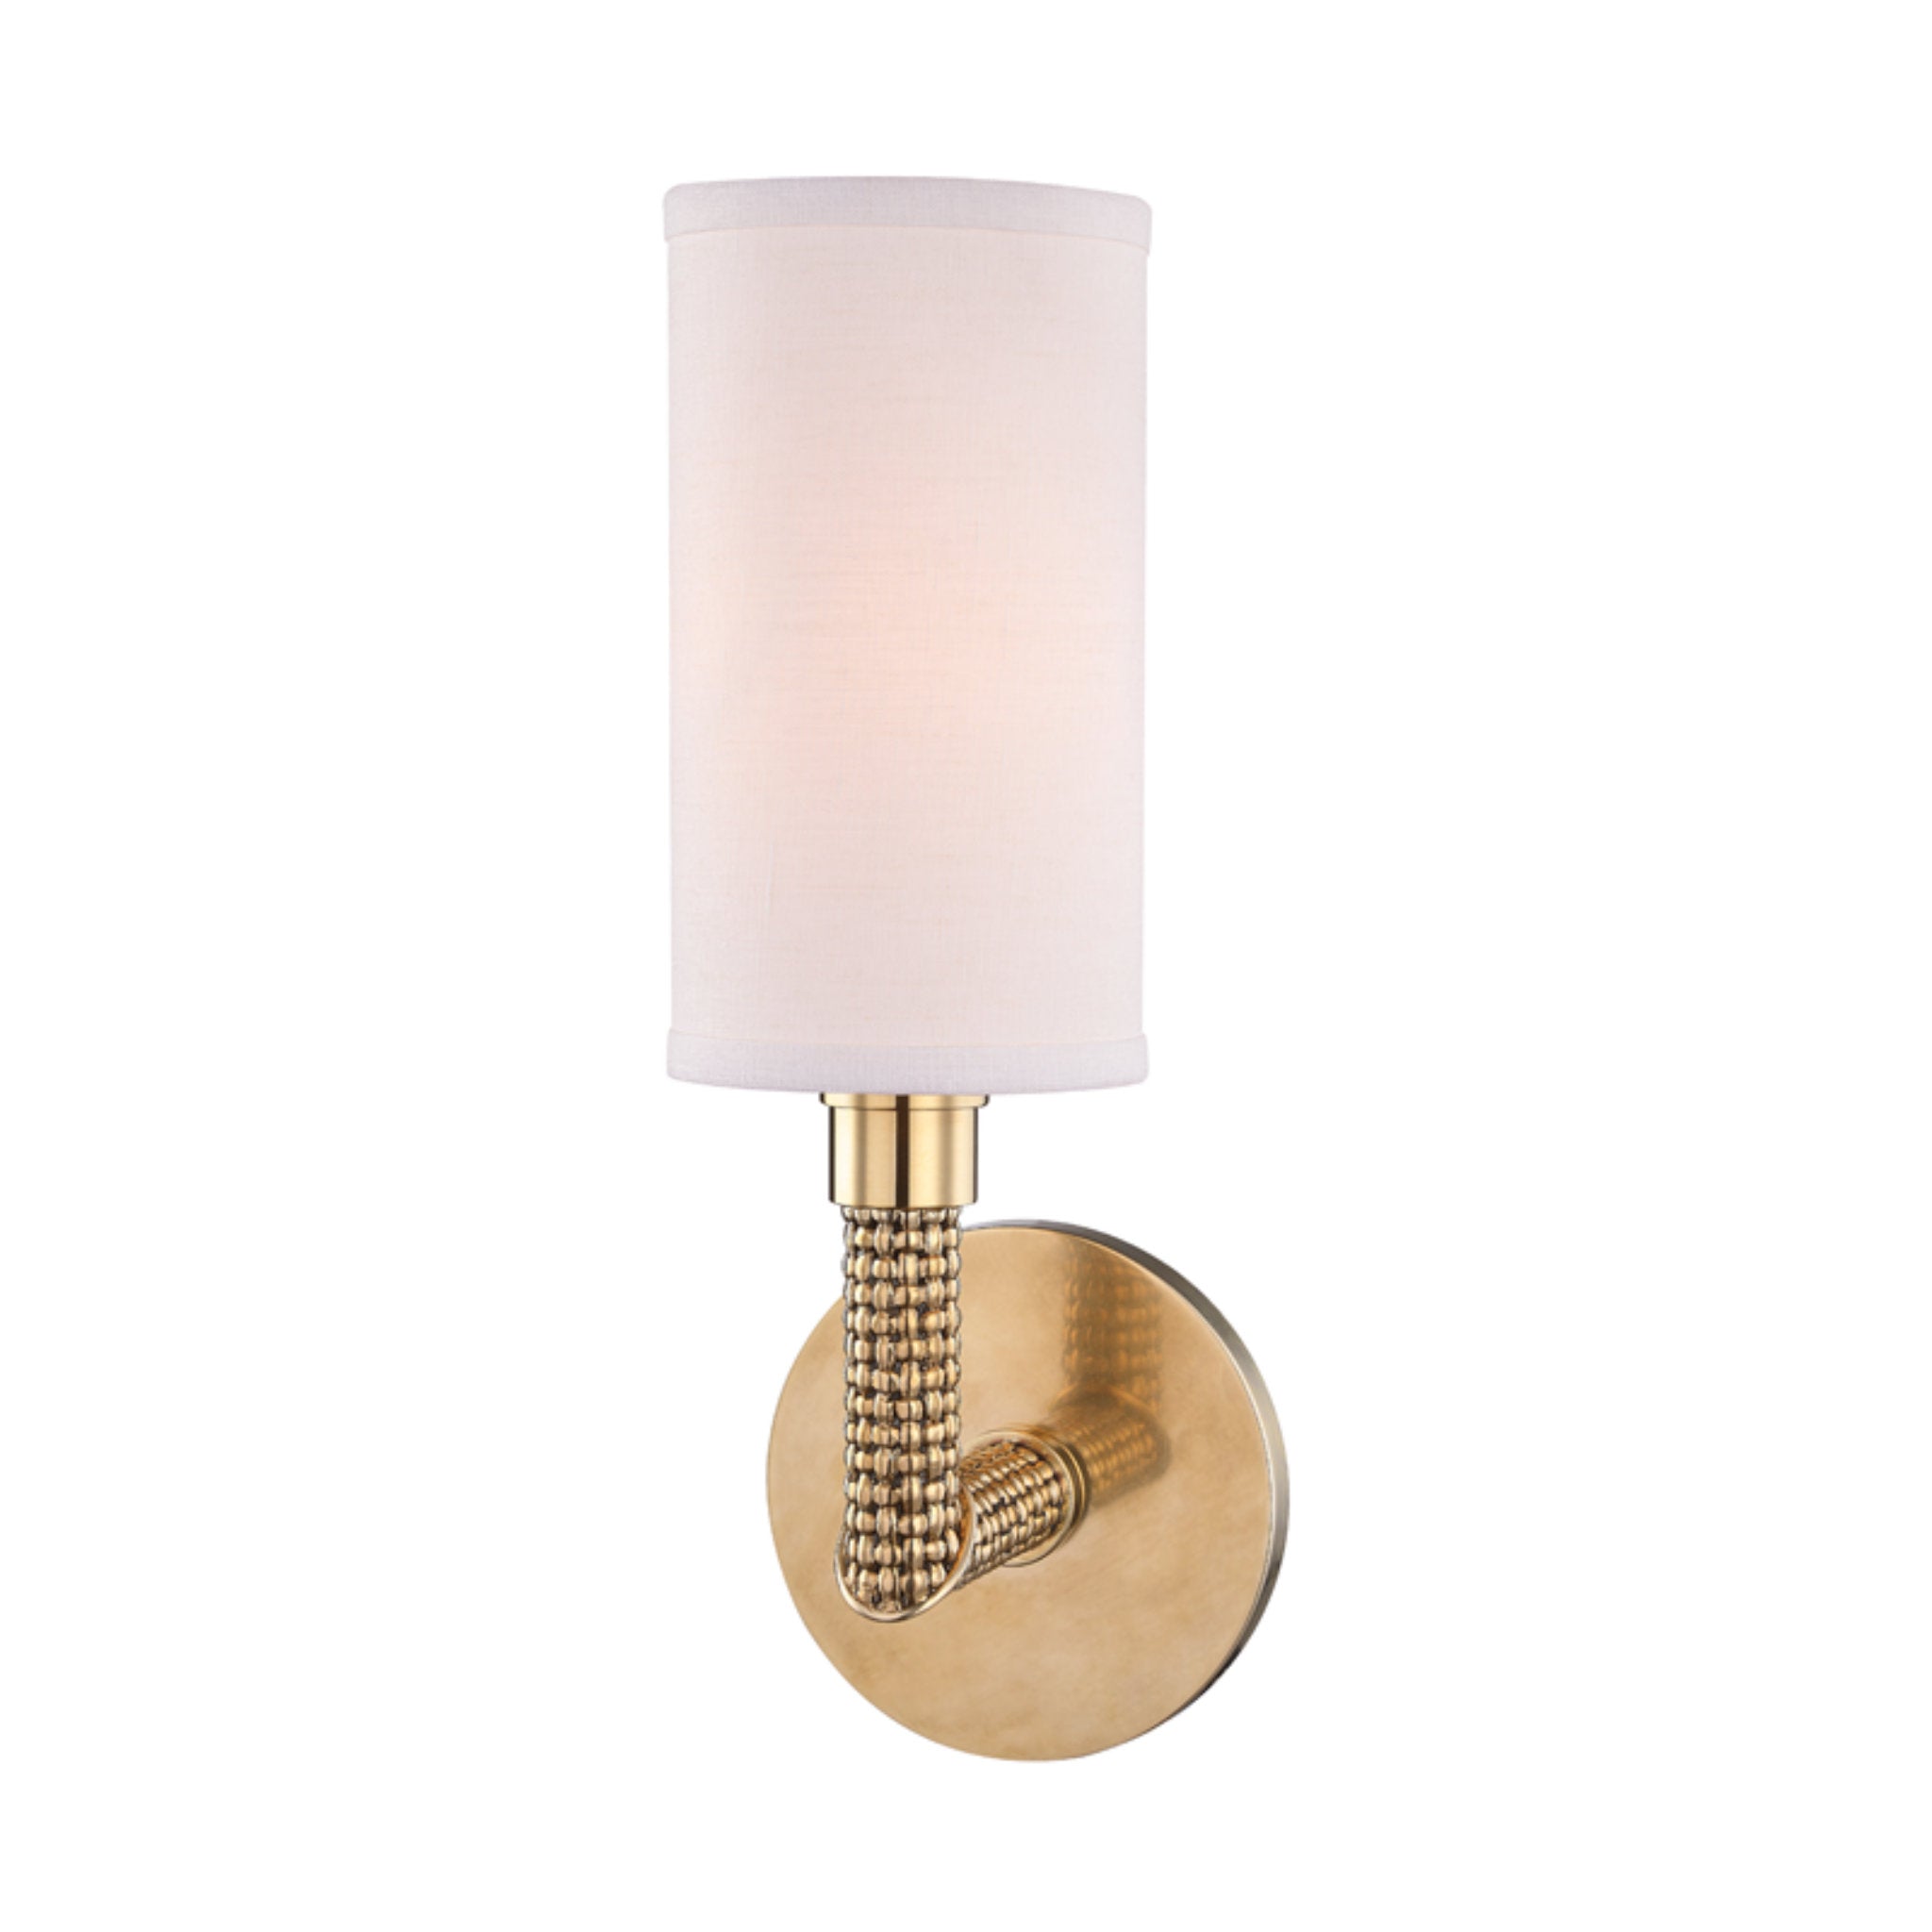 Dubois 1 Light Wall Sconce in Aged Brass